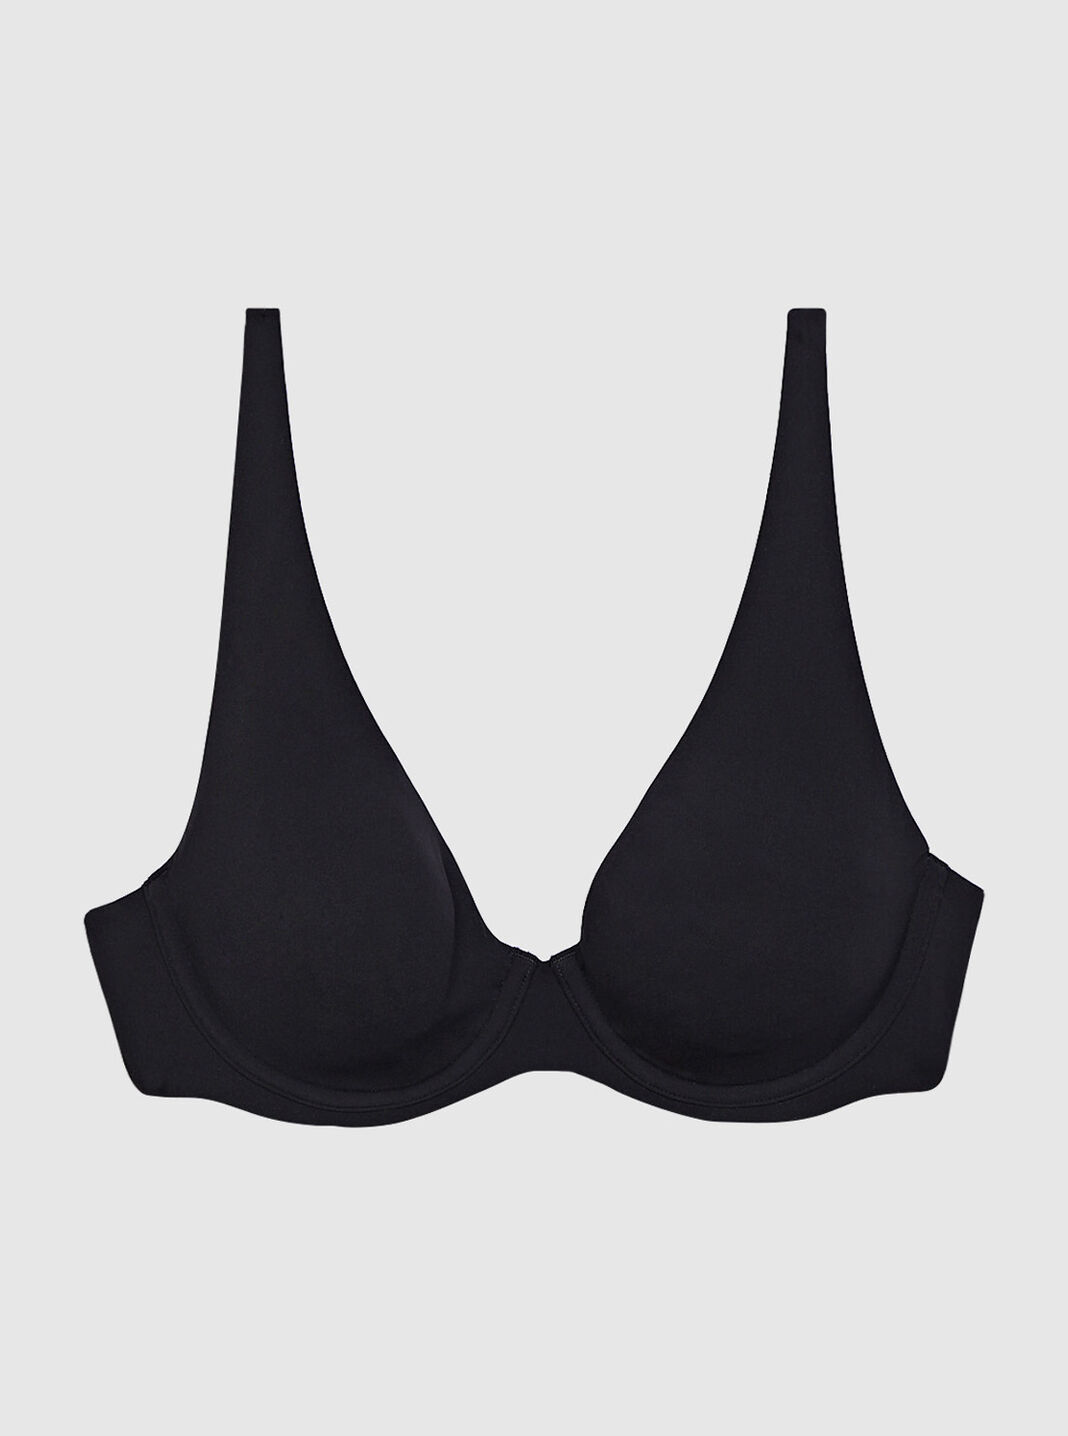 PetiteClothingLine on X: #28AA bras really do exist. Finding